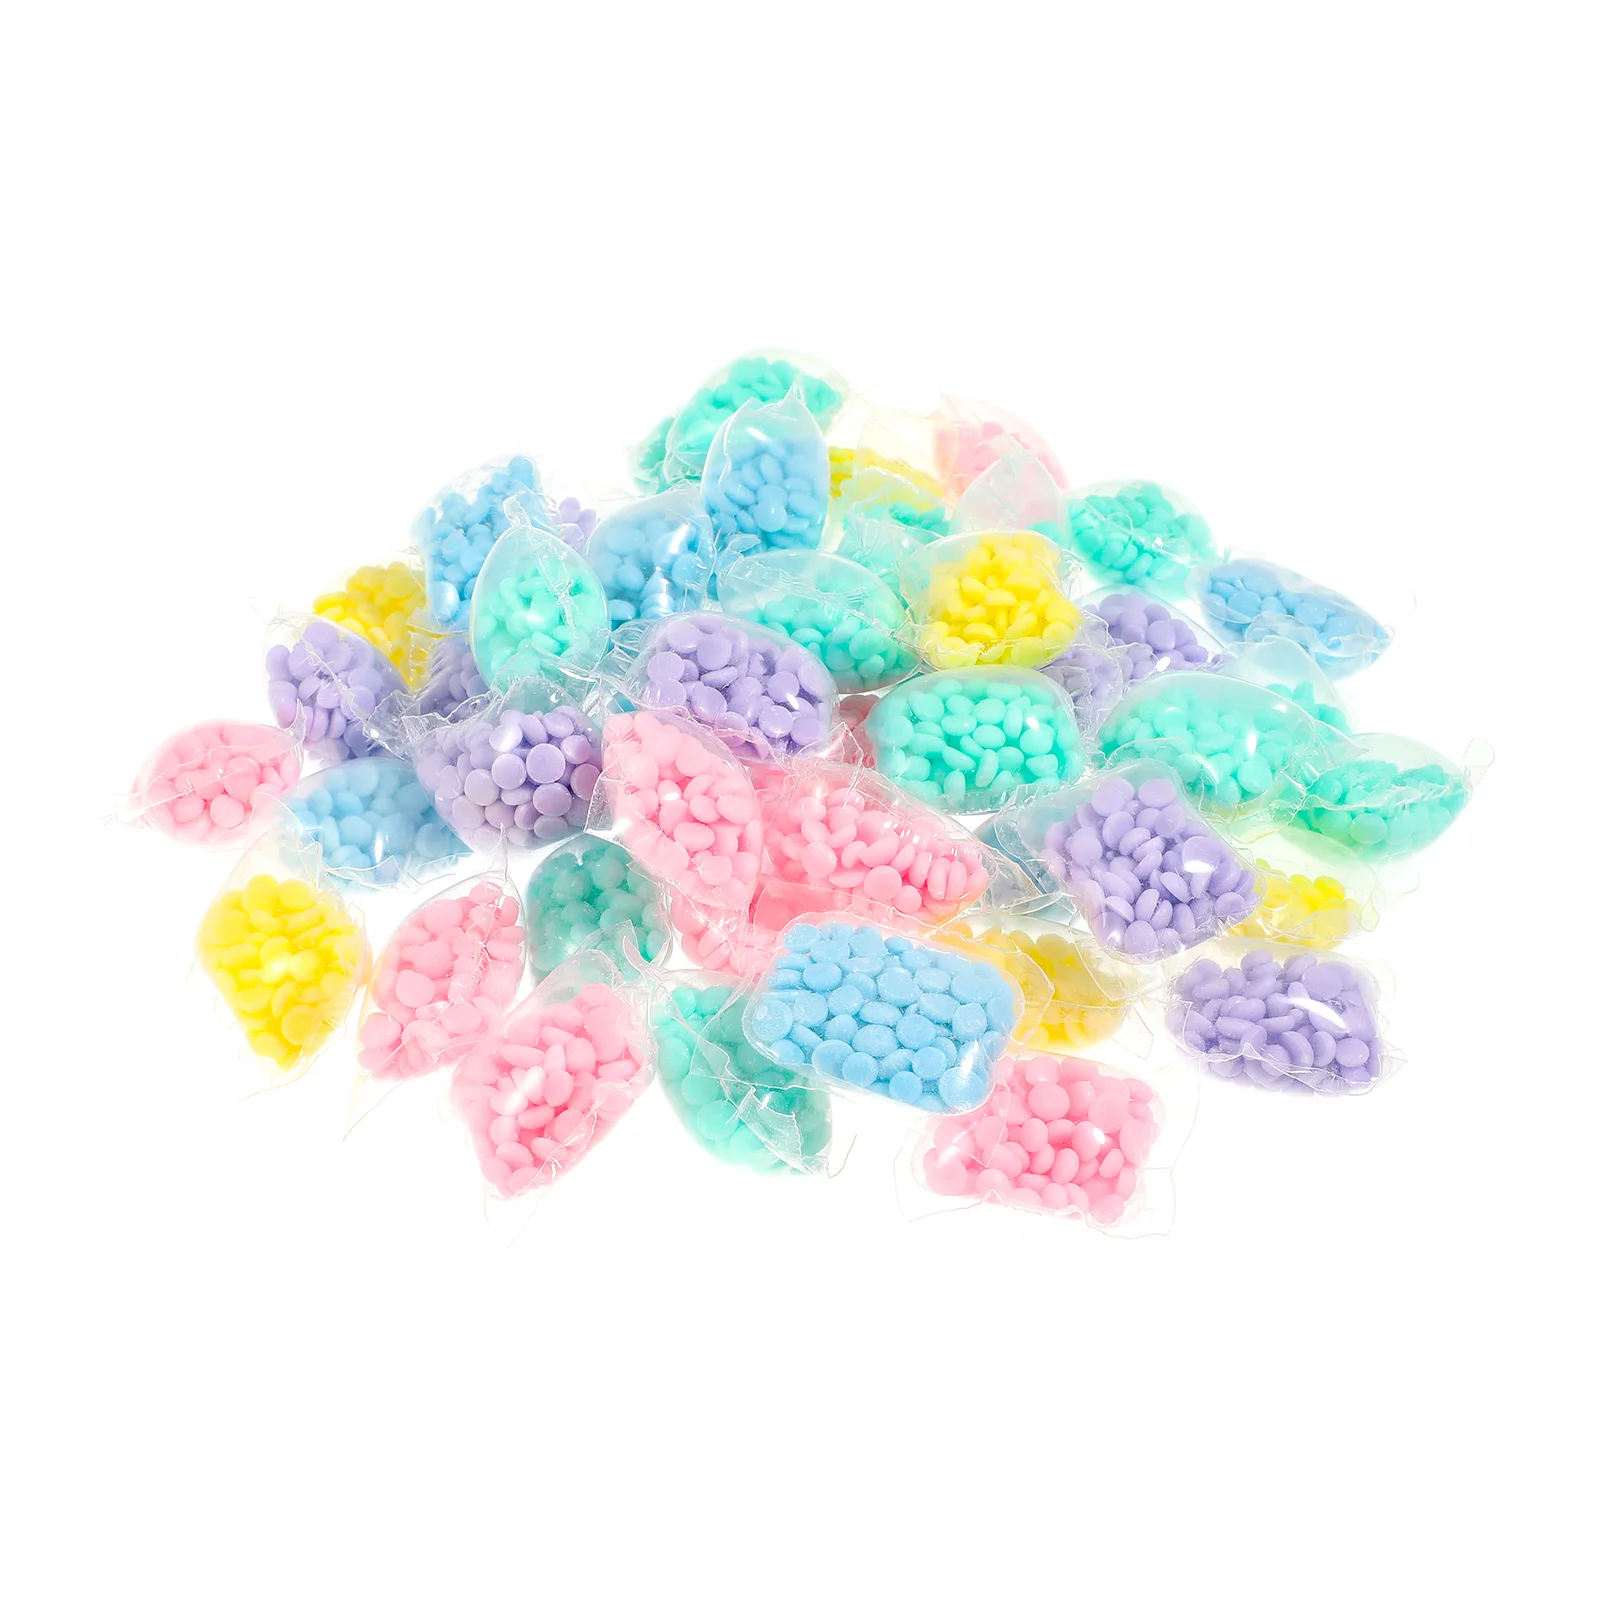 

Mix Color Washer Machine Fragrance Beads Soft And Long Lasting Fragrance Pack Concentrated For Cleaner And Fresher Clothes